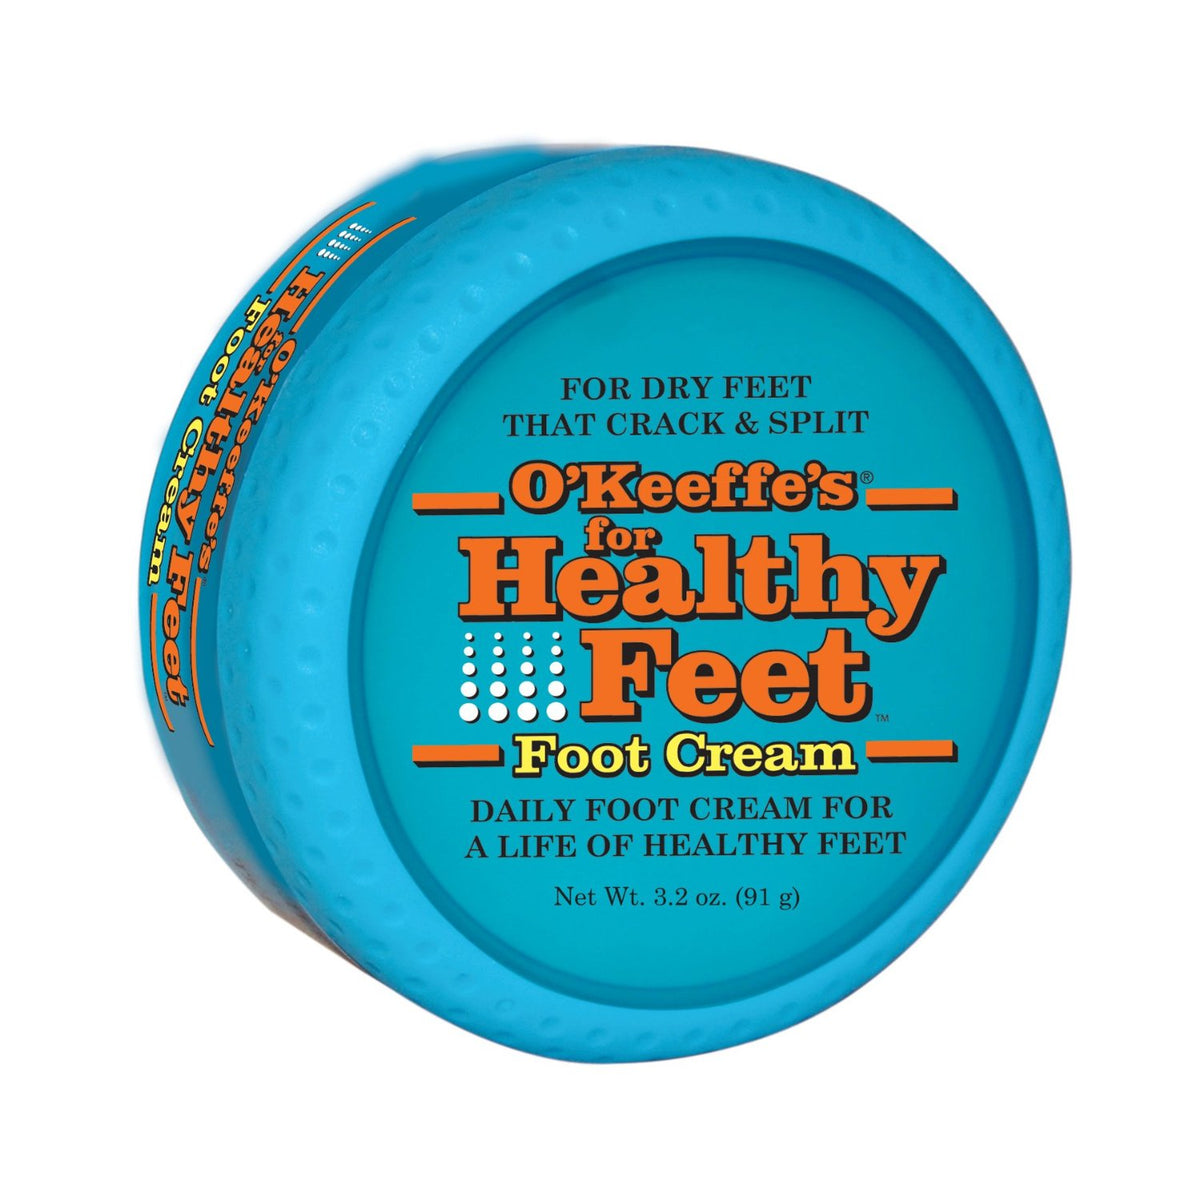 Buy working foot cream - Online store for personal care, foot cream lotions & gels in USA, on sale, low price, discount deals, coupon code